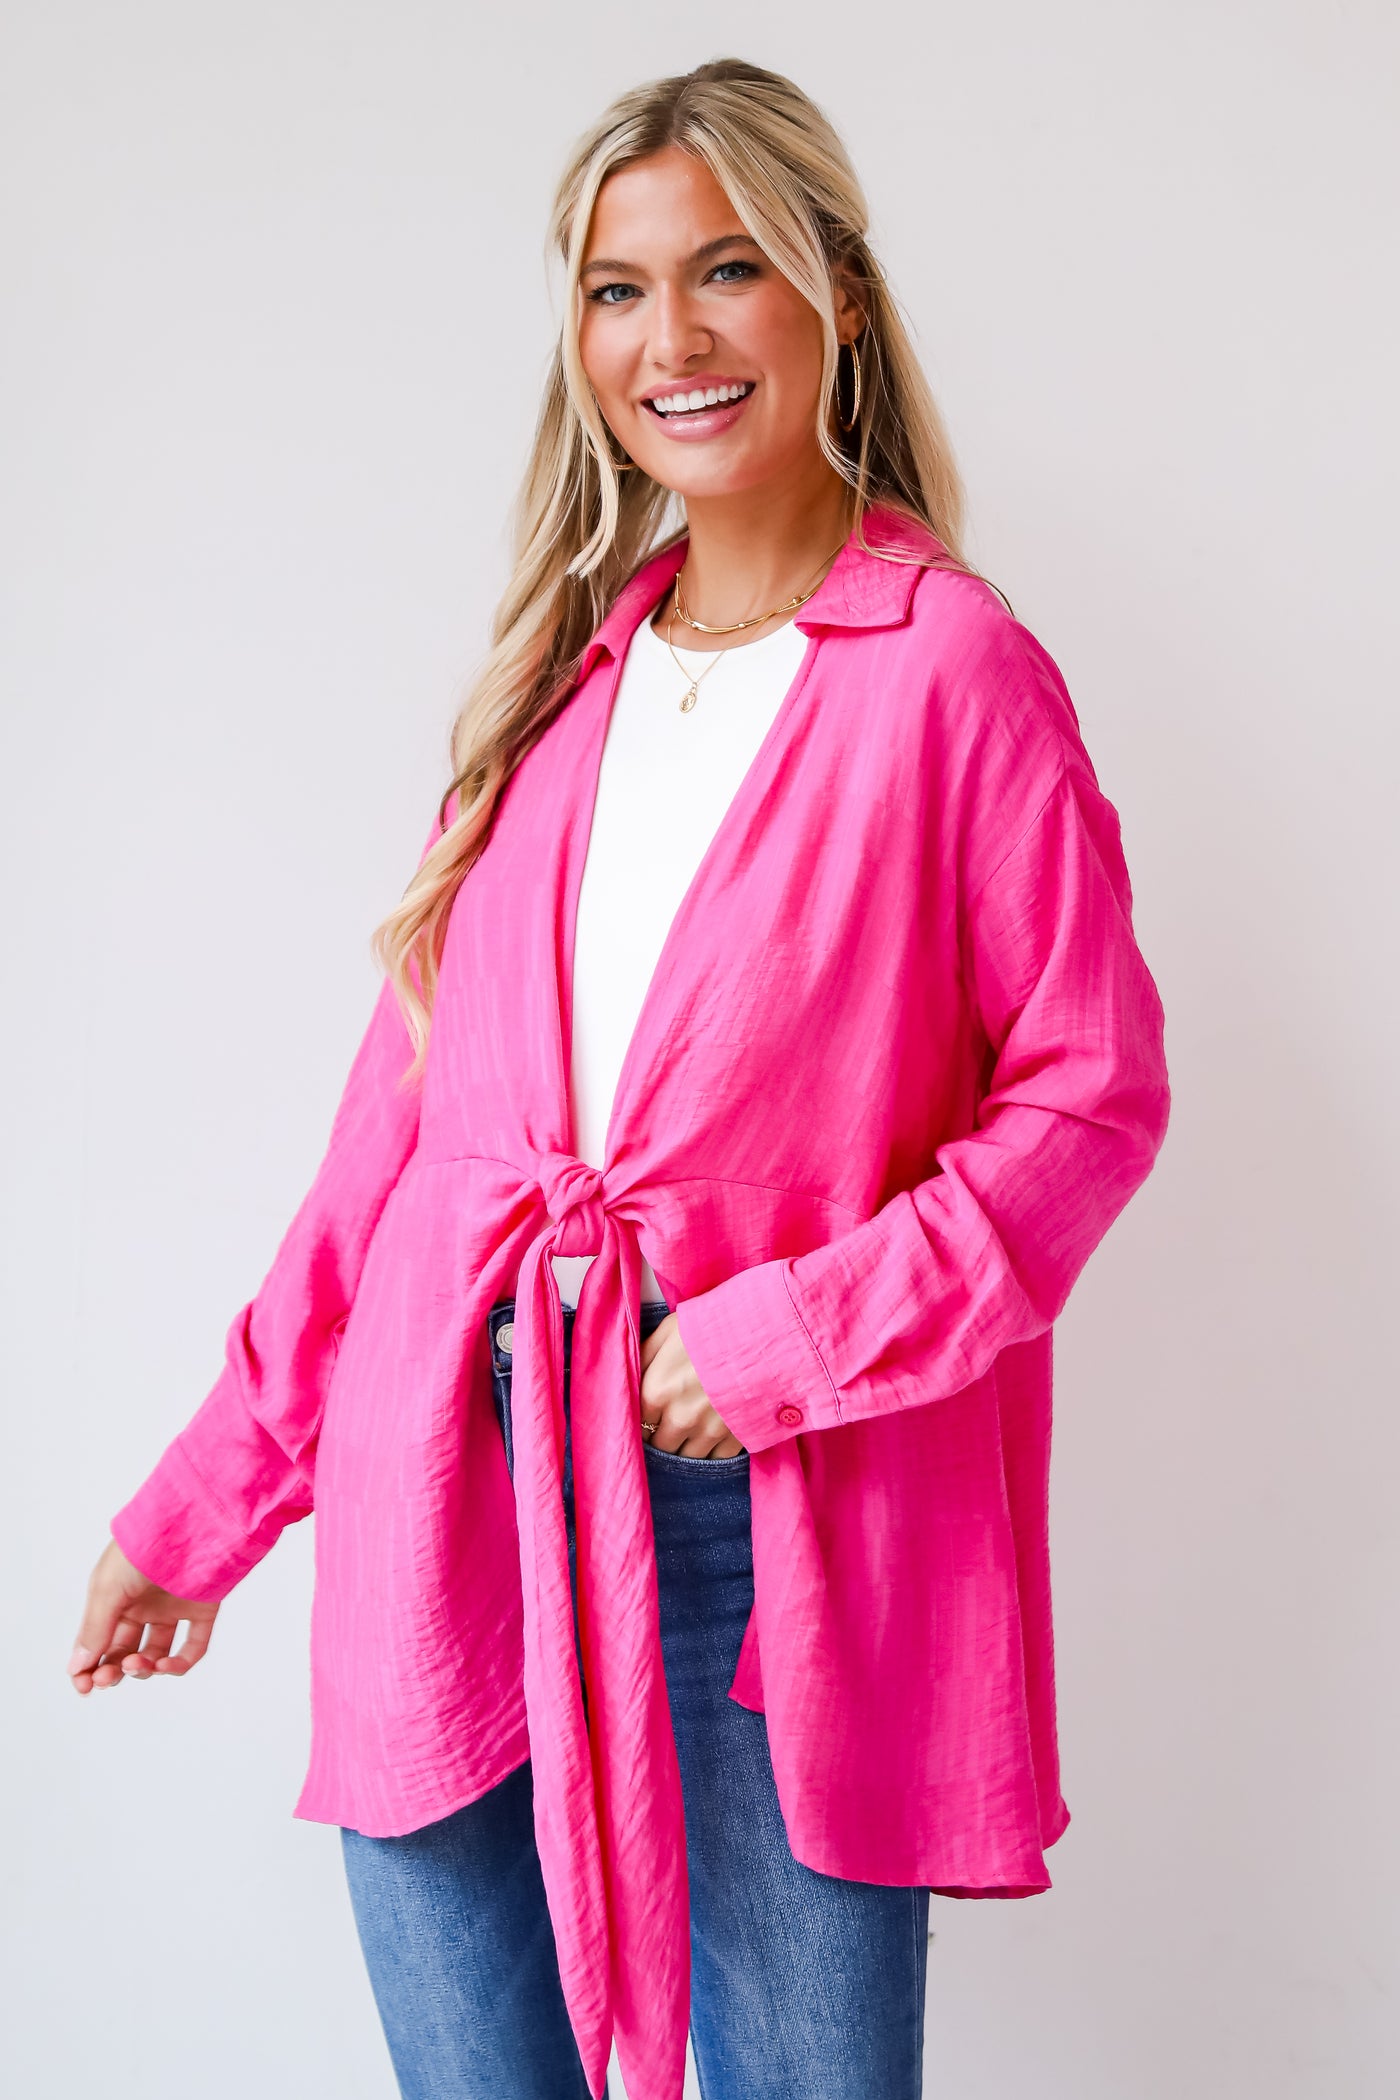 Hot Pink Tie-Front Blouse for women